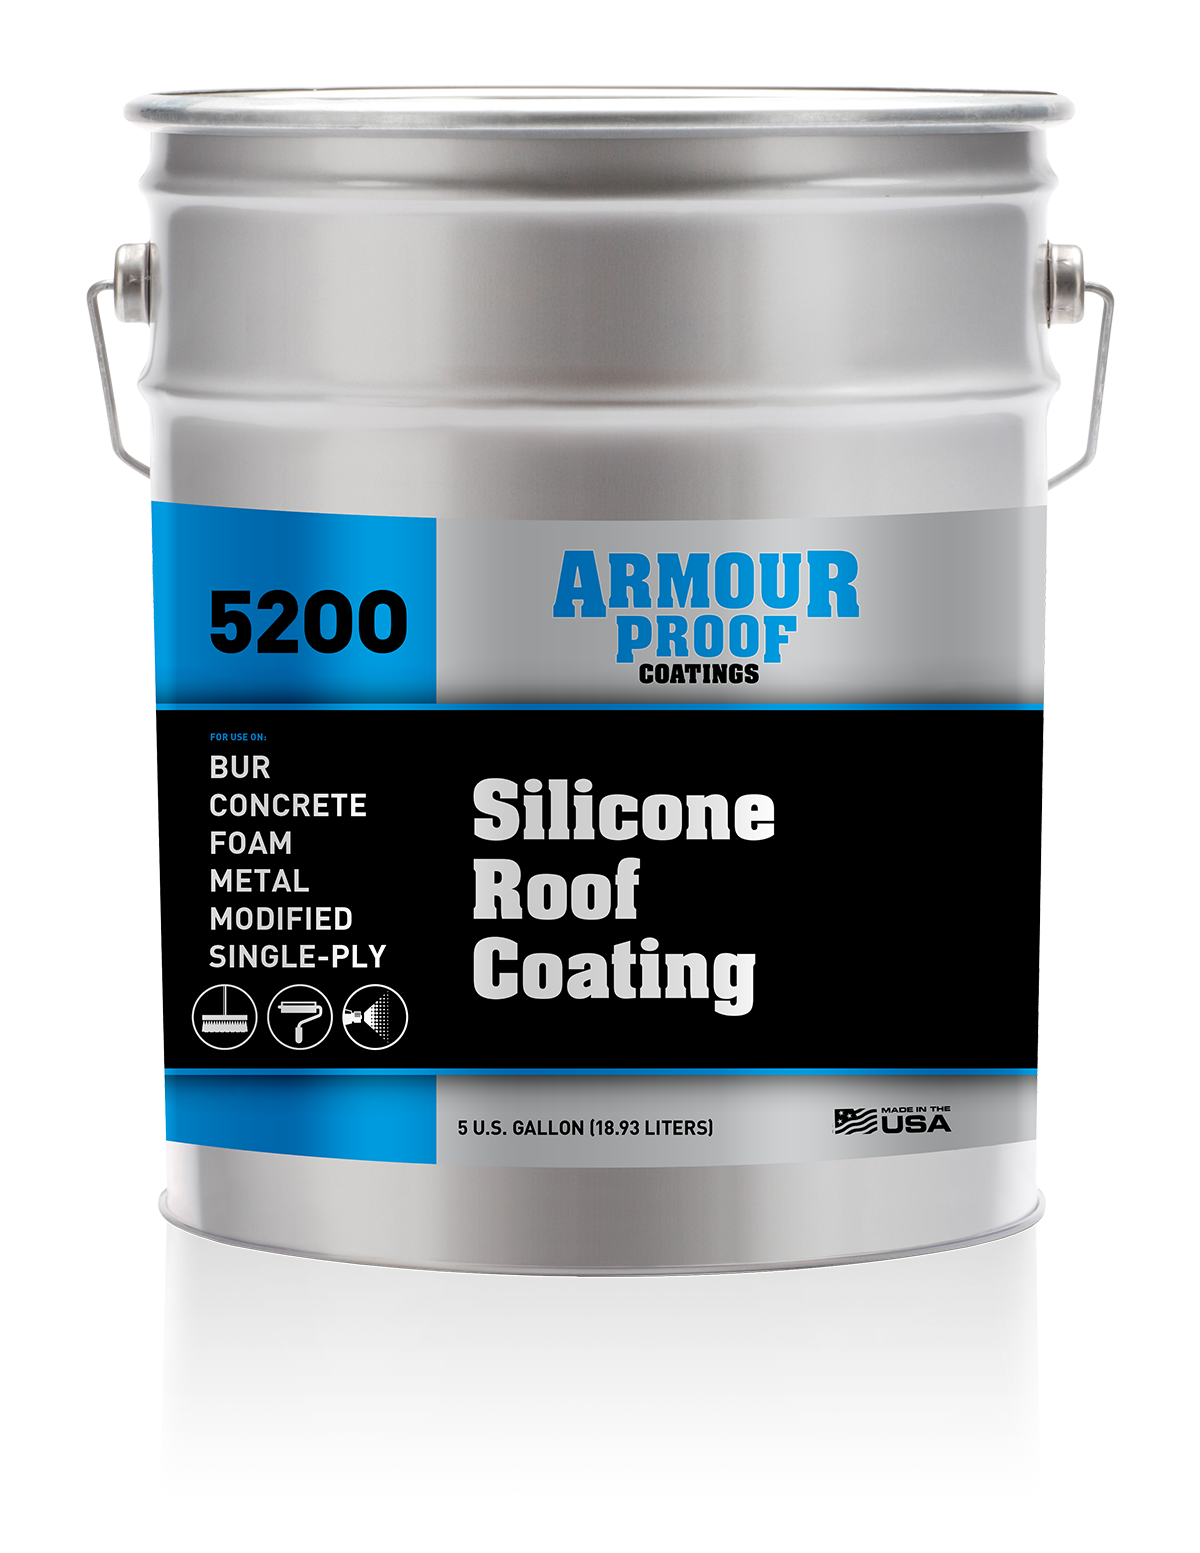 Image of United Asphalt's Armour Proof AP-5200 Silicone Roof Coating in 5 Gallon Pail